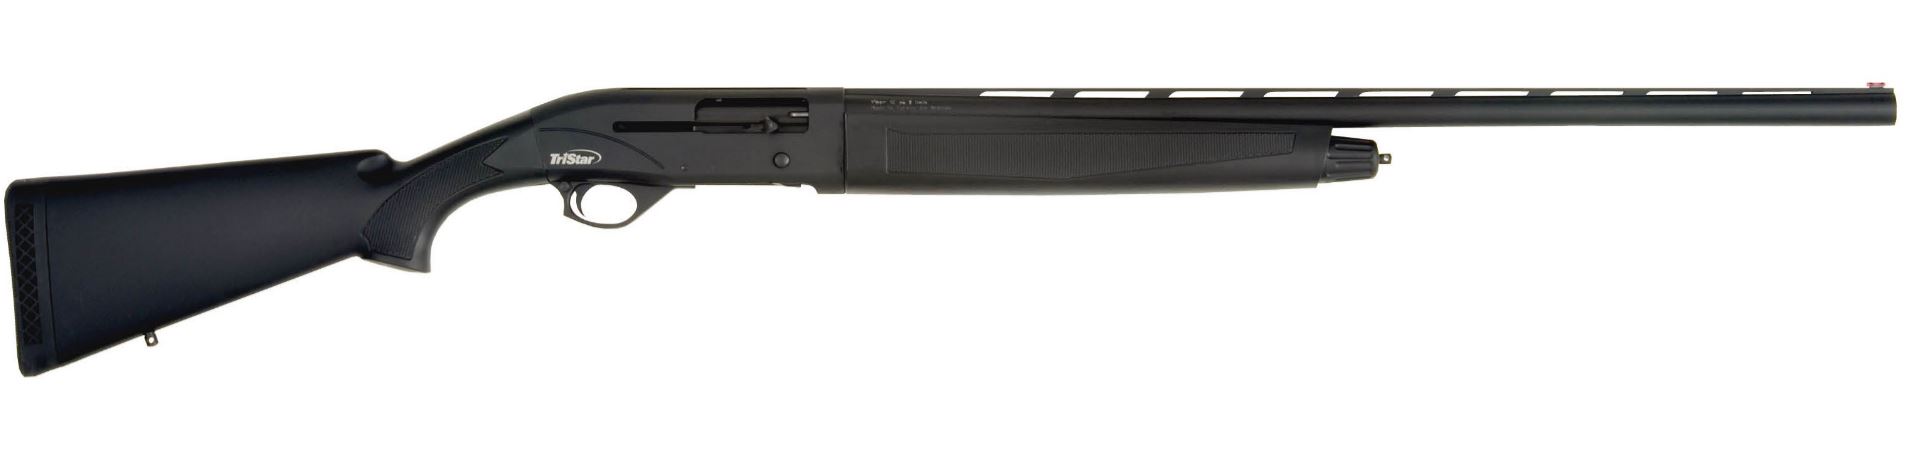 TriStar Sporting Arms Viper G2 12 Gauge